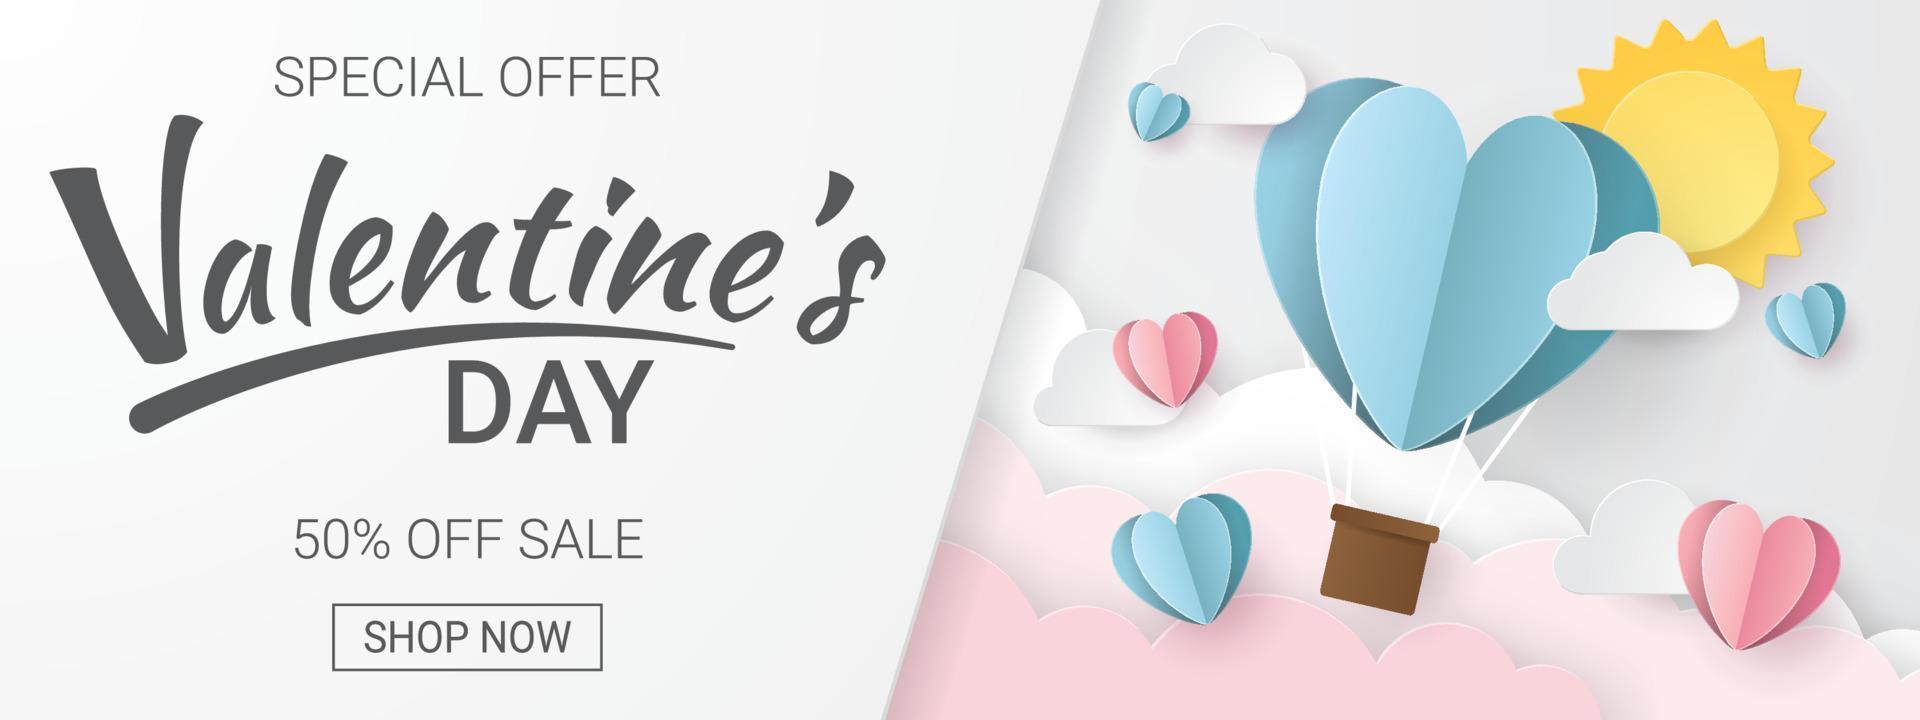 Valentine's Day sale banner. Paper cut style. Vector illustration